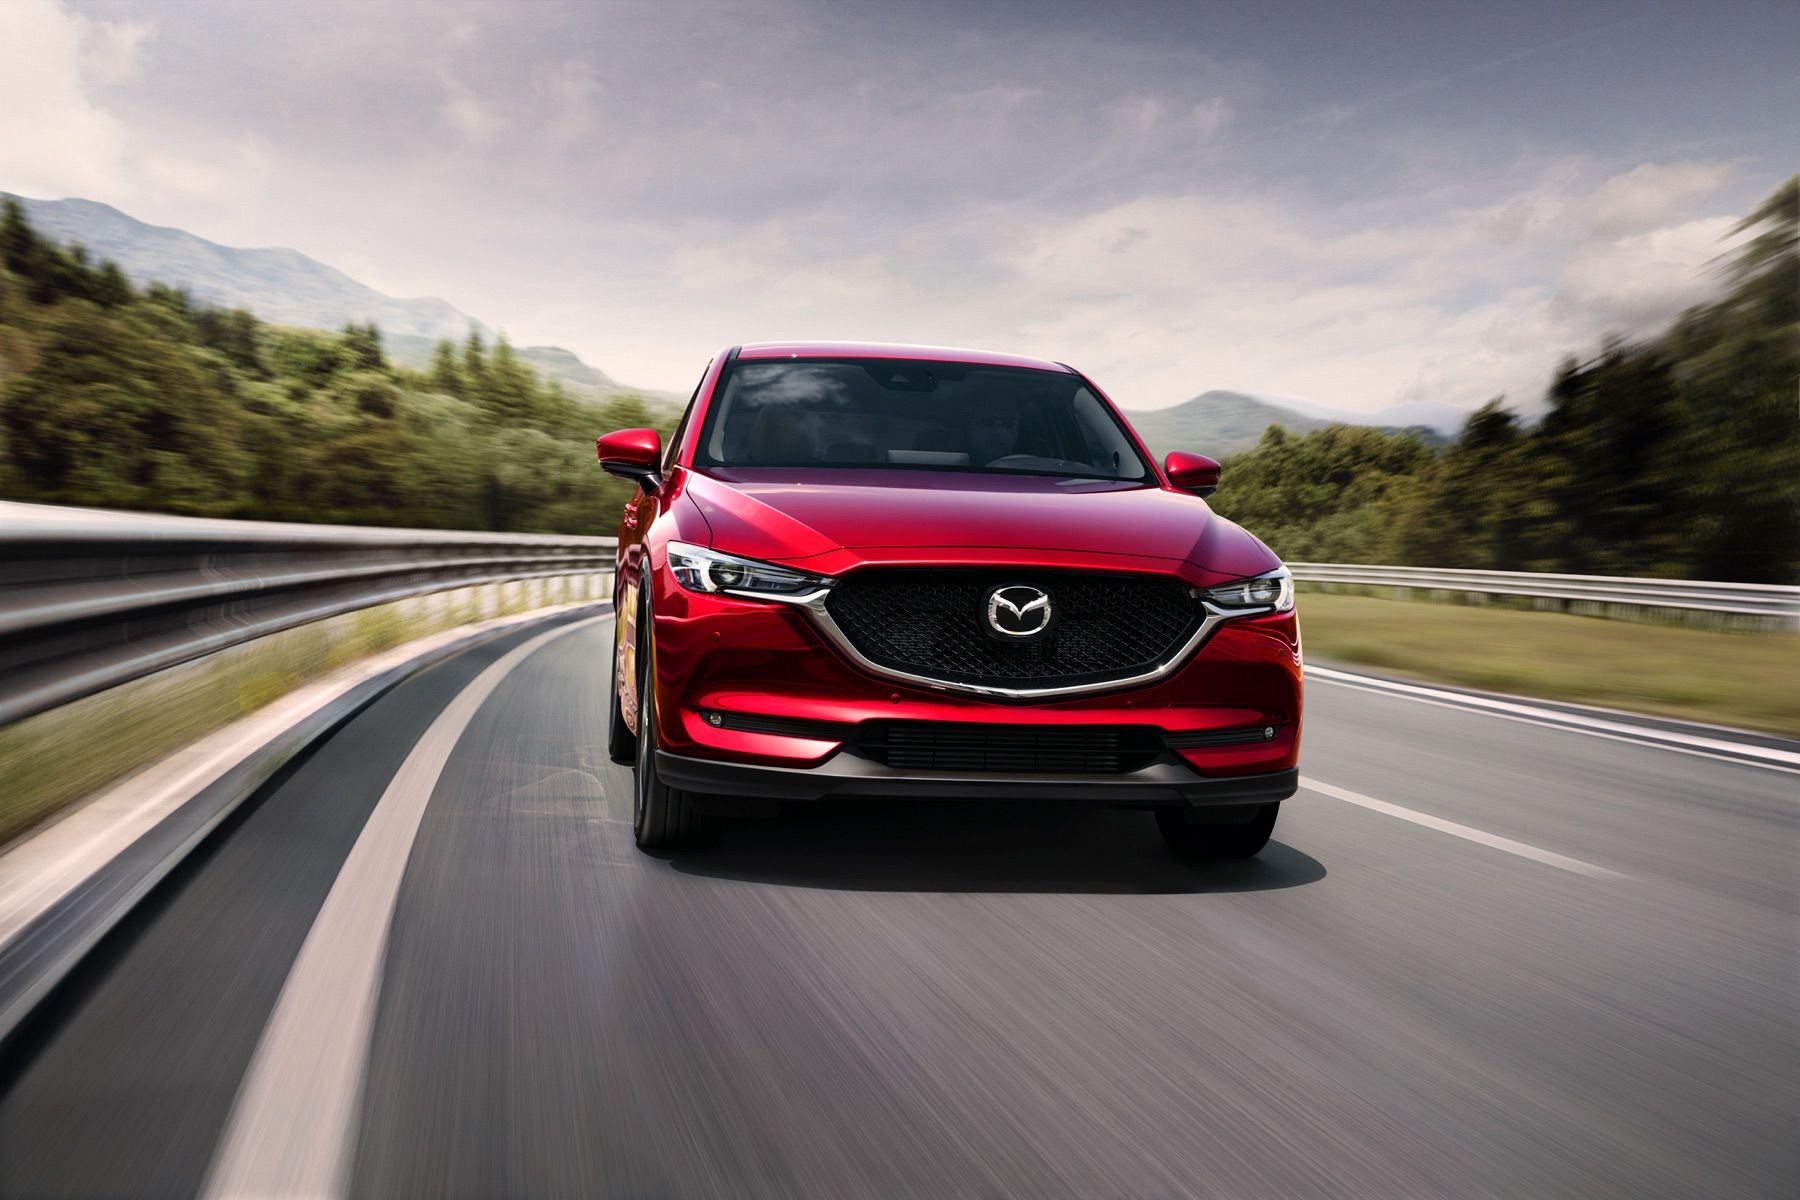 Consumer Reports 2020: Mazda Is Now The Most Reliable Auto Brand On The Market, Period, Full Stop, No Arguments